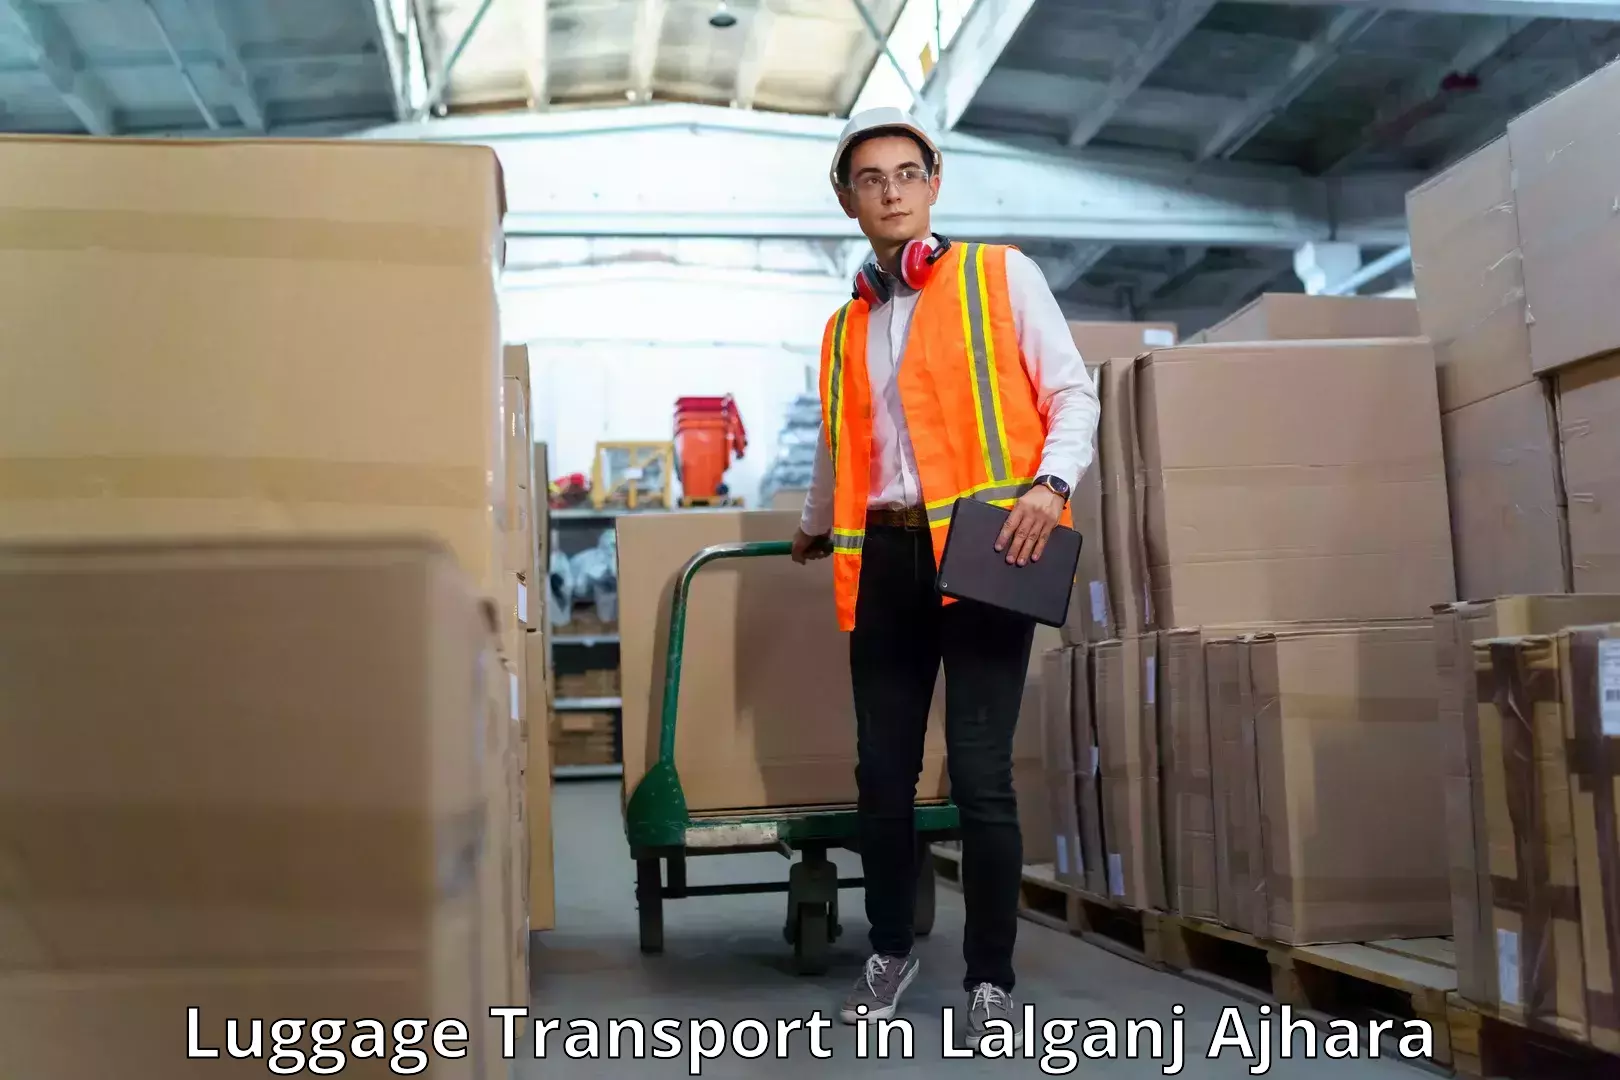 Luggage storage and delivery in Lalganj Ajhara